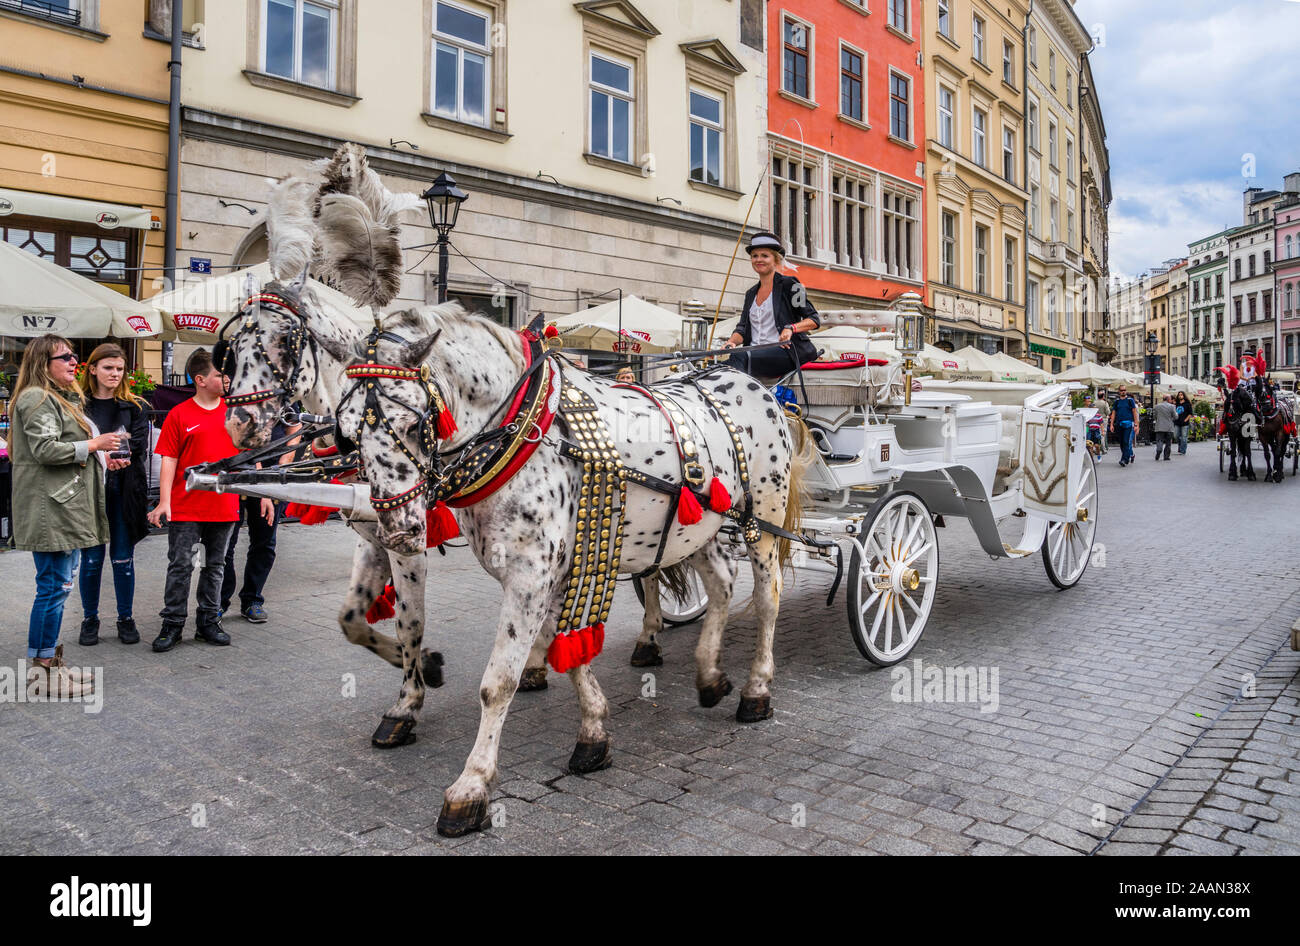 coachwoman and her horse-drawn fiaker carriage awaiting fares on the main square in the Old Town of Krakow, Lesser Poland, Poland Stock Photo